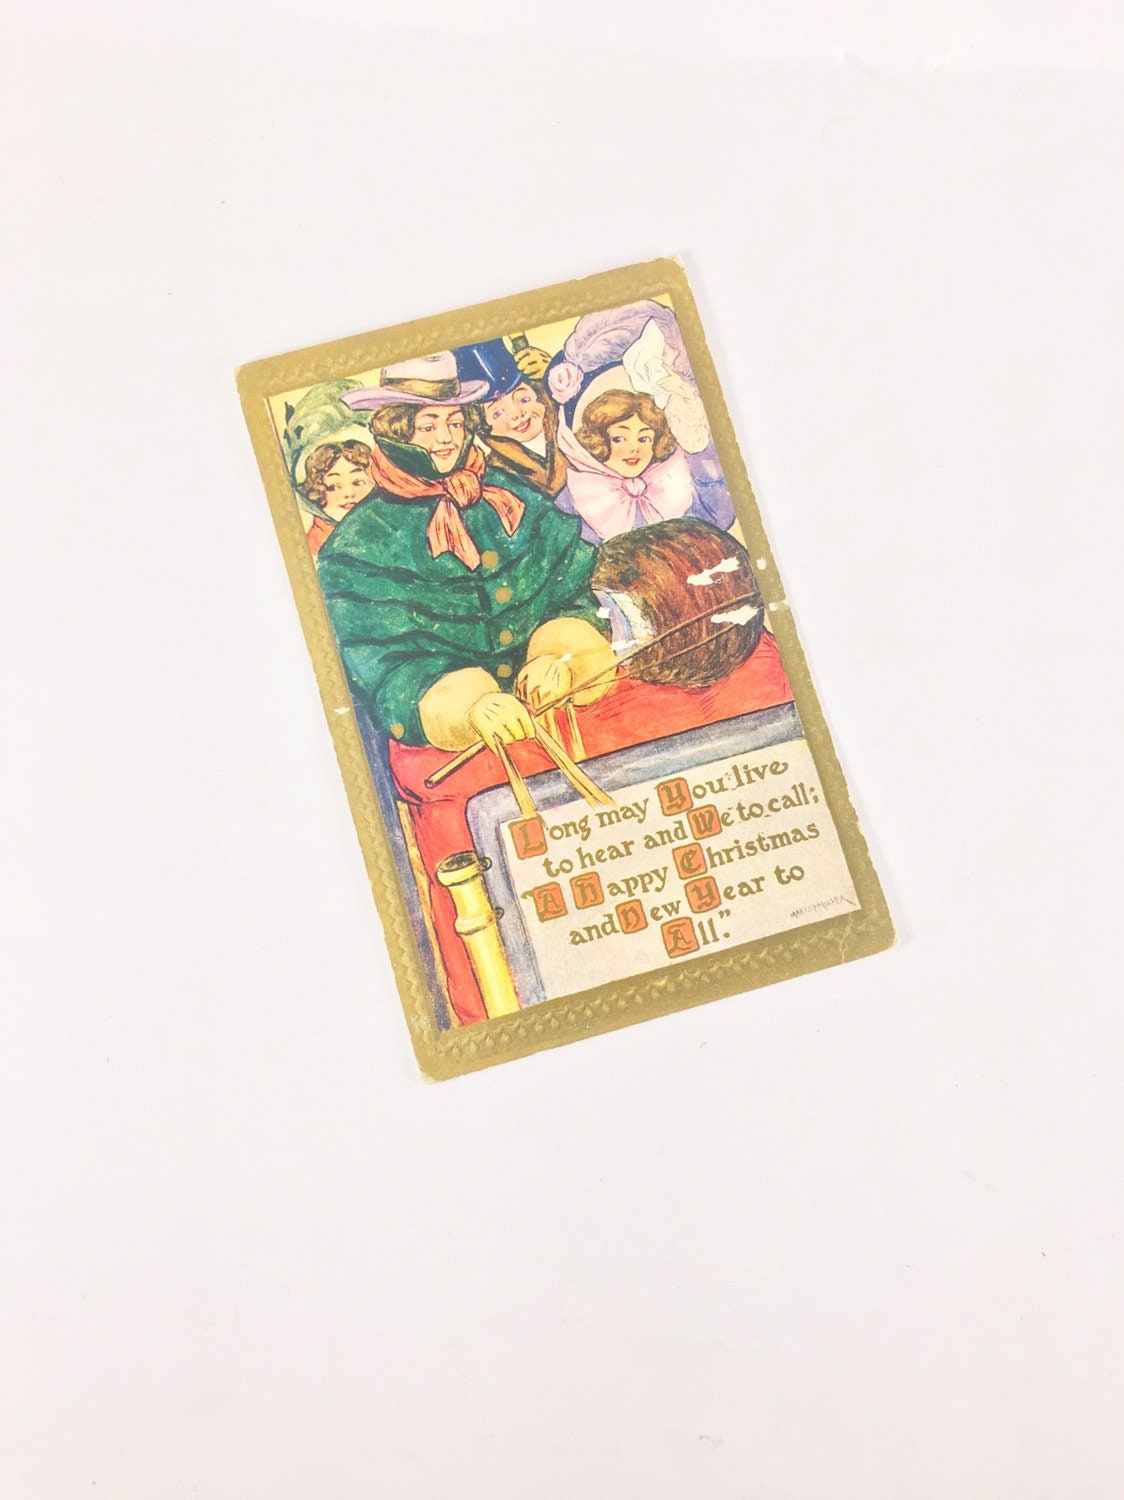 1907 Vintage Christmas & New Year celebrations postcard. Unused original with divided back. 1 cent postage box. Decor art prop set gift